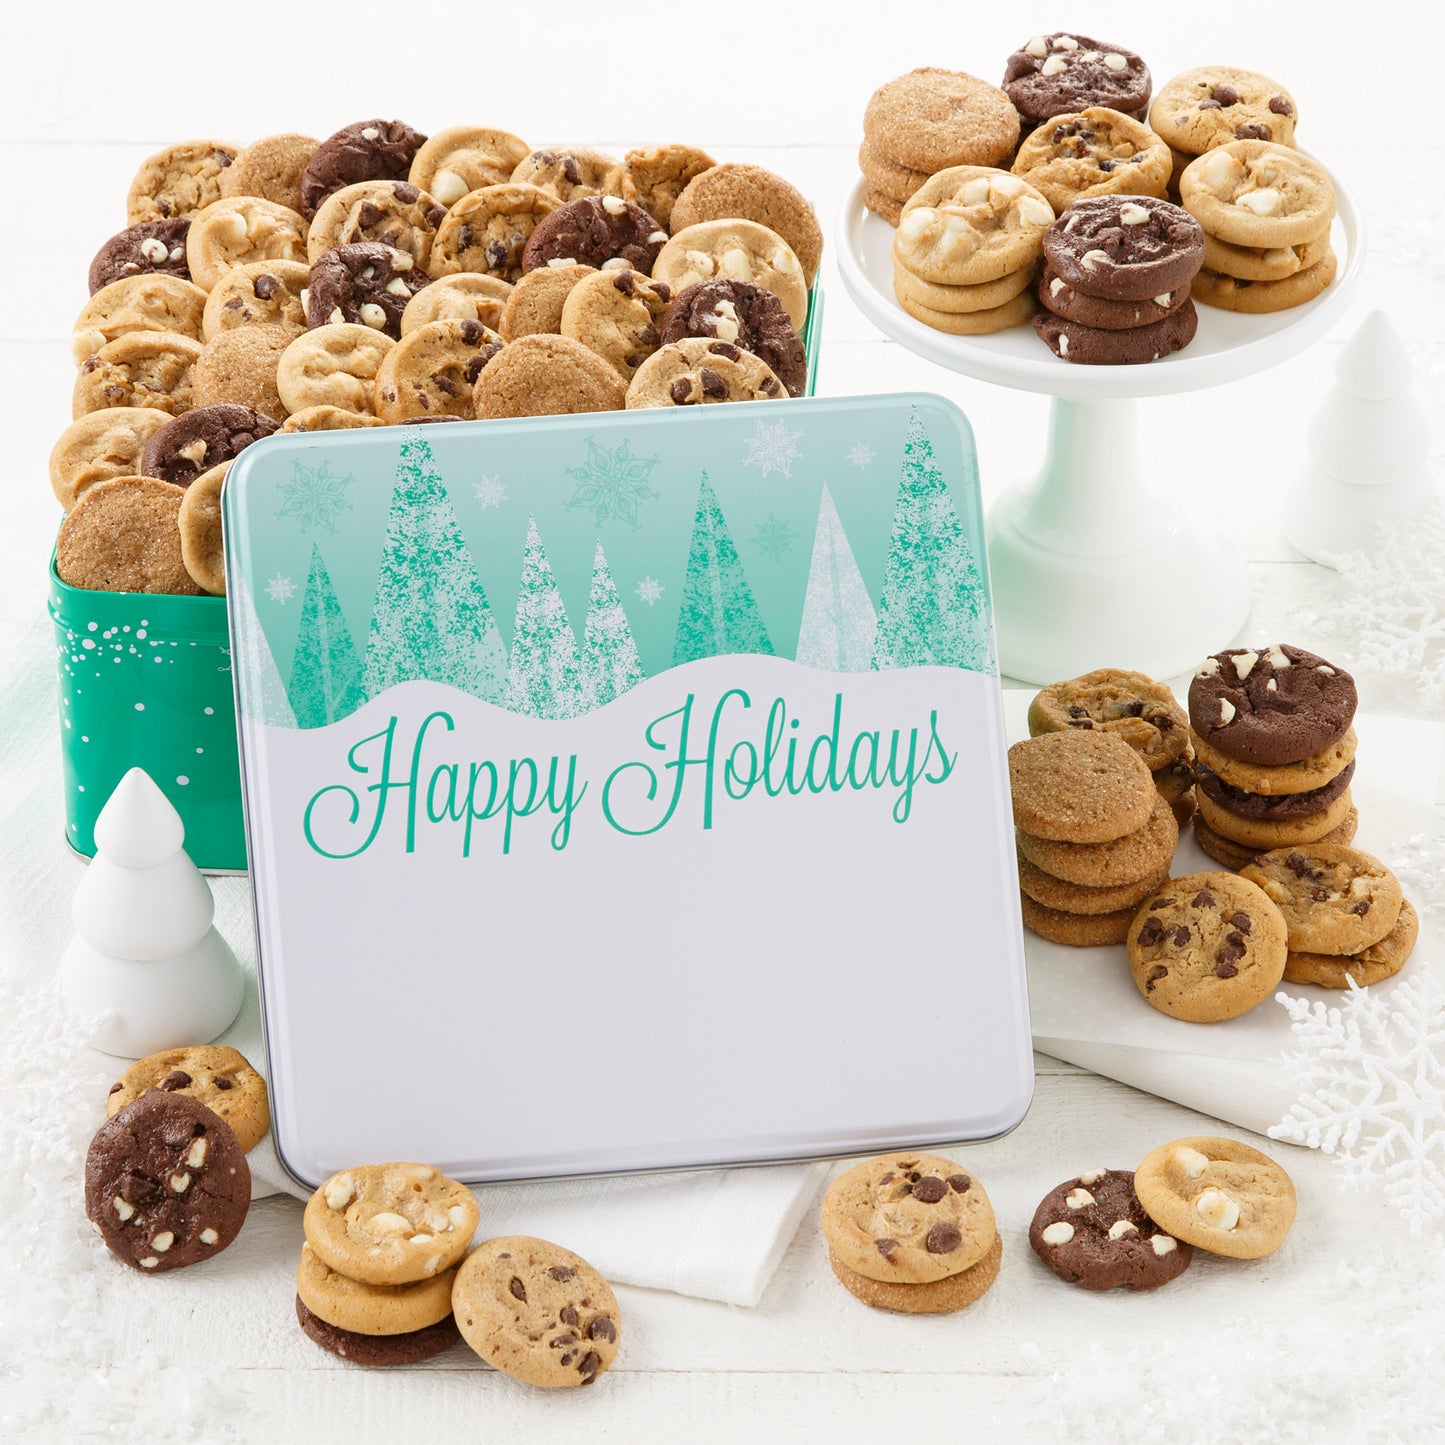 A Happy Holidays gift tin decorated with Christmas Trees and snowflakes and filled with an assortment of Nibblers®